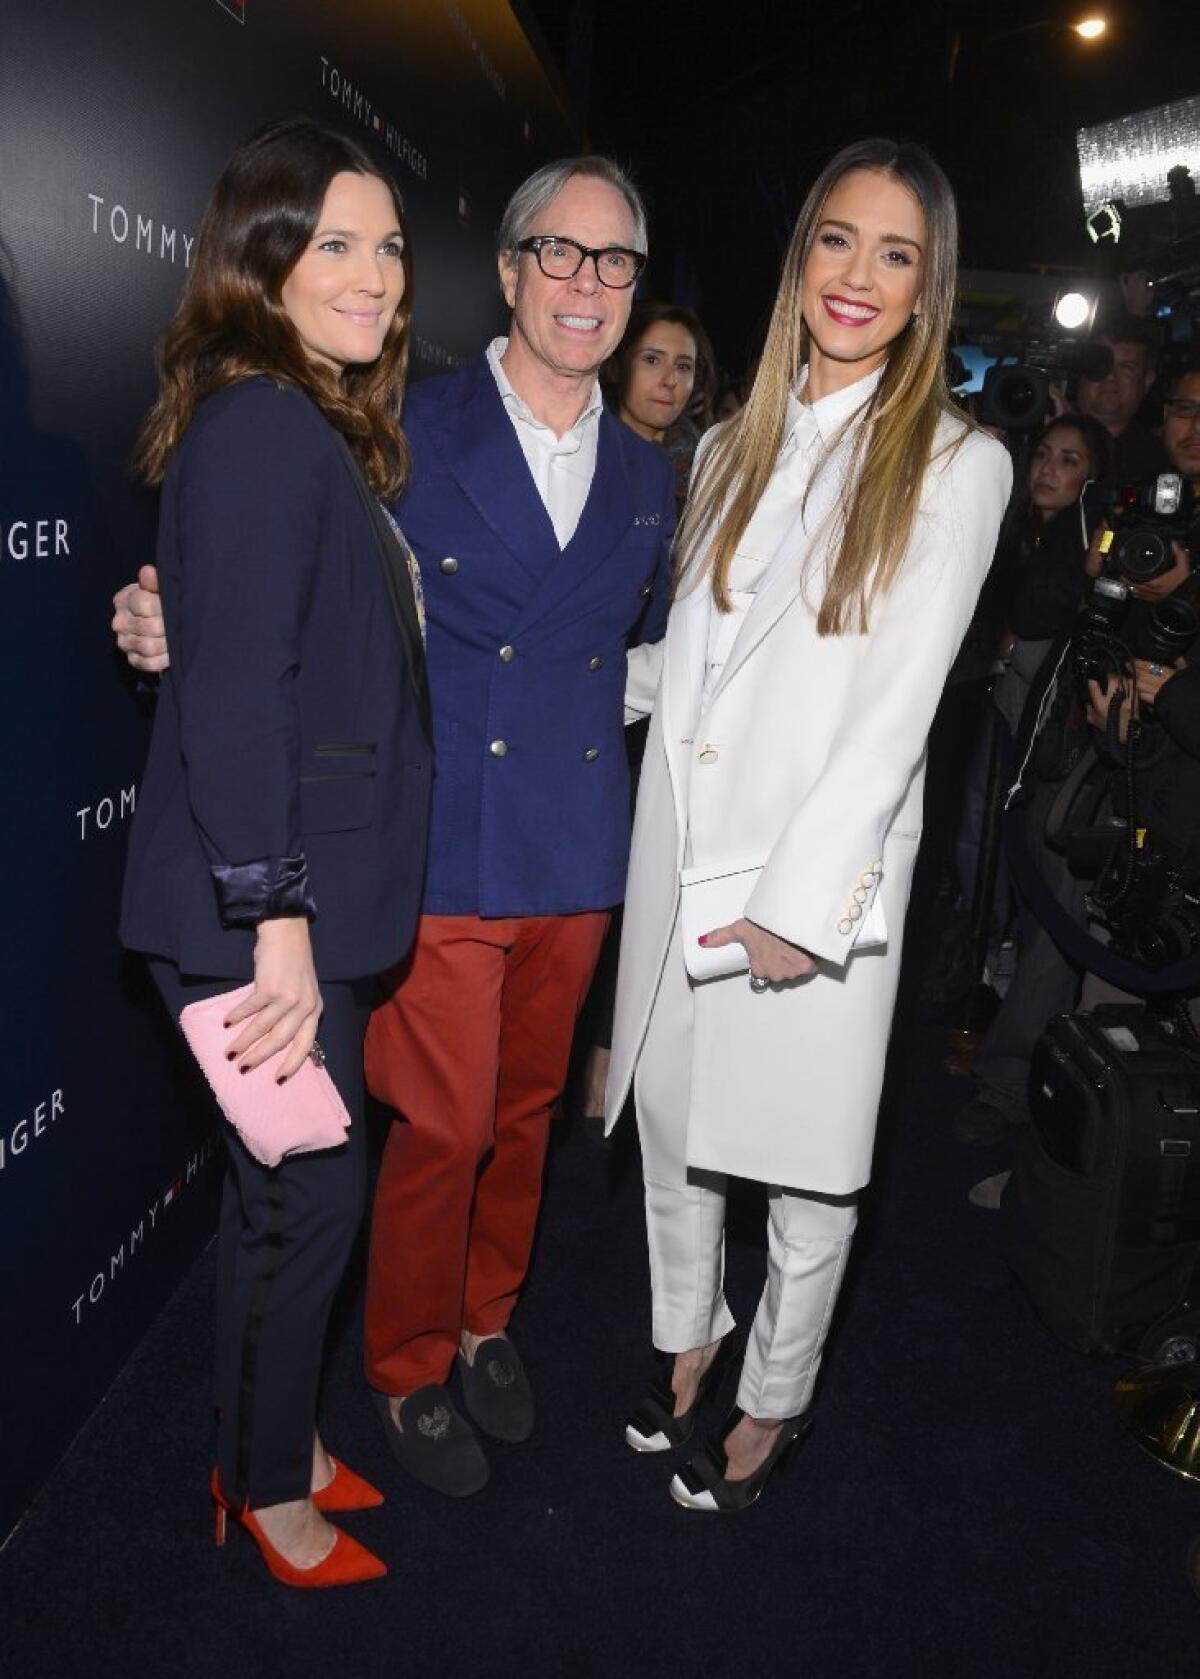 From left , Drew Barrymore, Tommy Hilfiger and Jessica Alba pose at the Tommy Hilfiger West Coast flagship opening in West Hollywood on Wednesday.